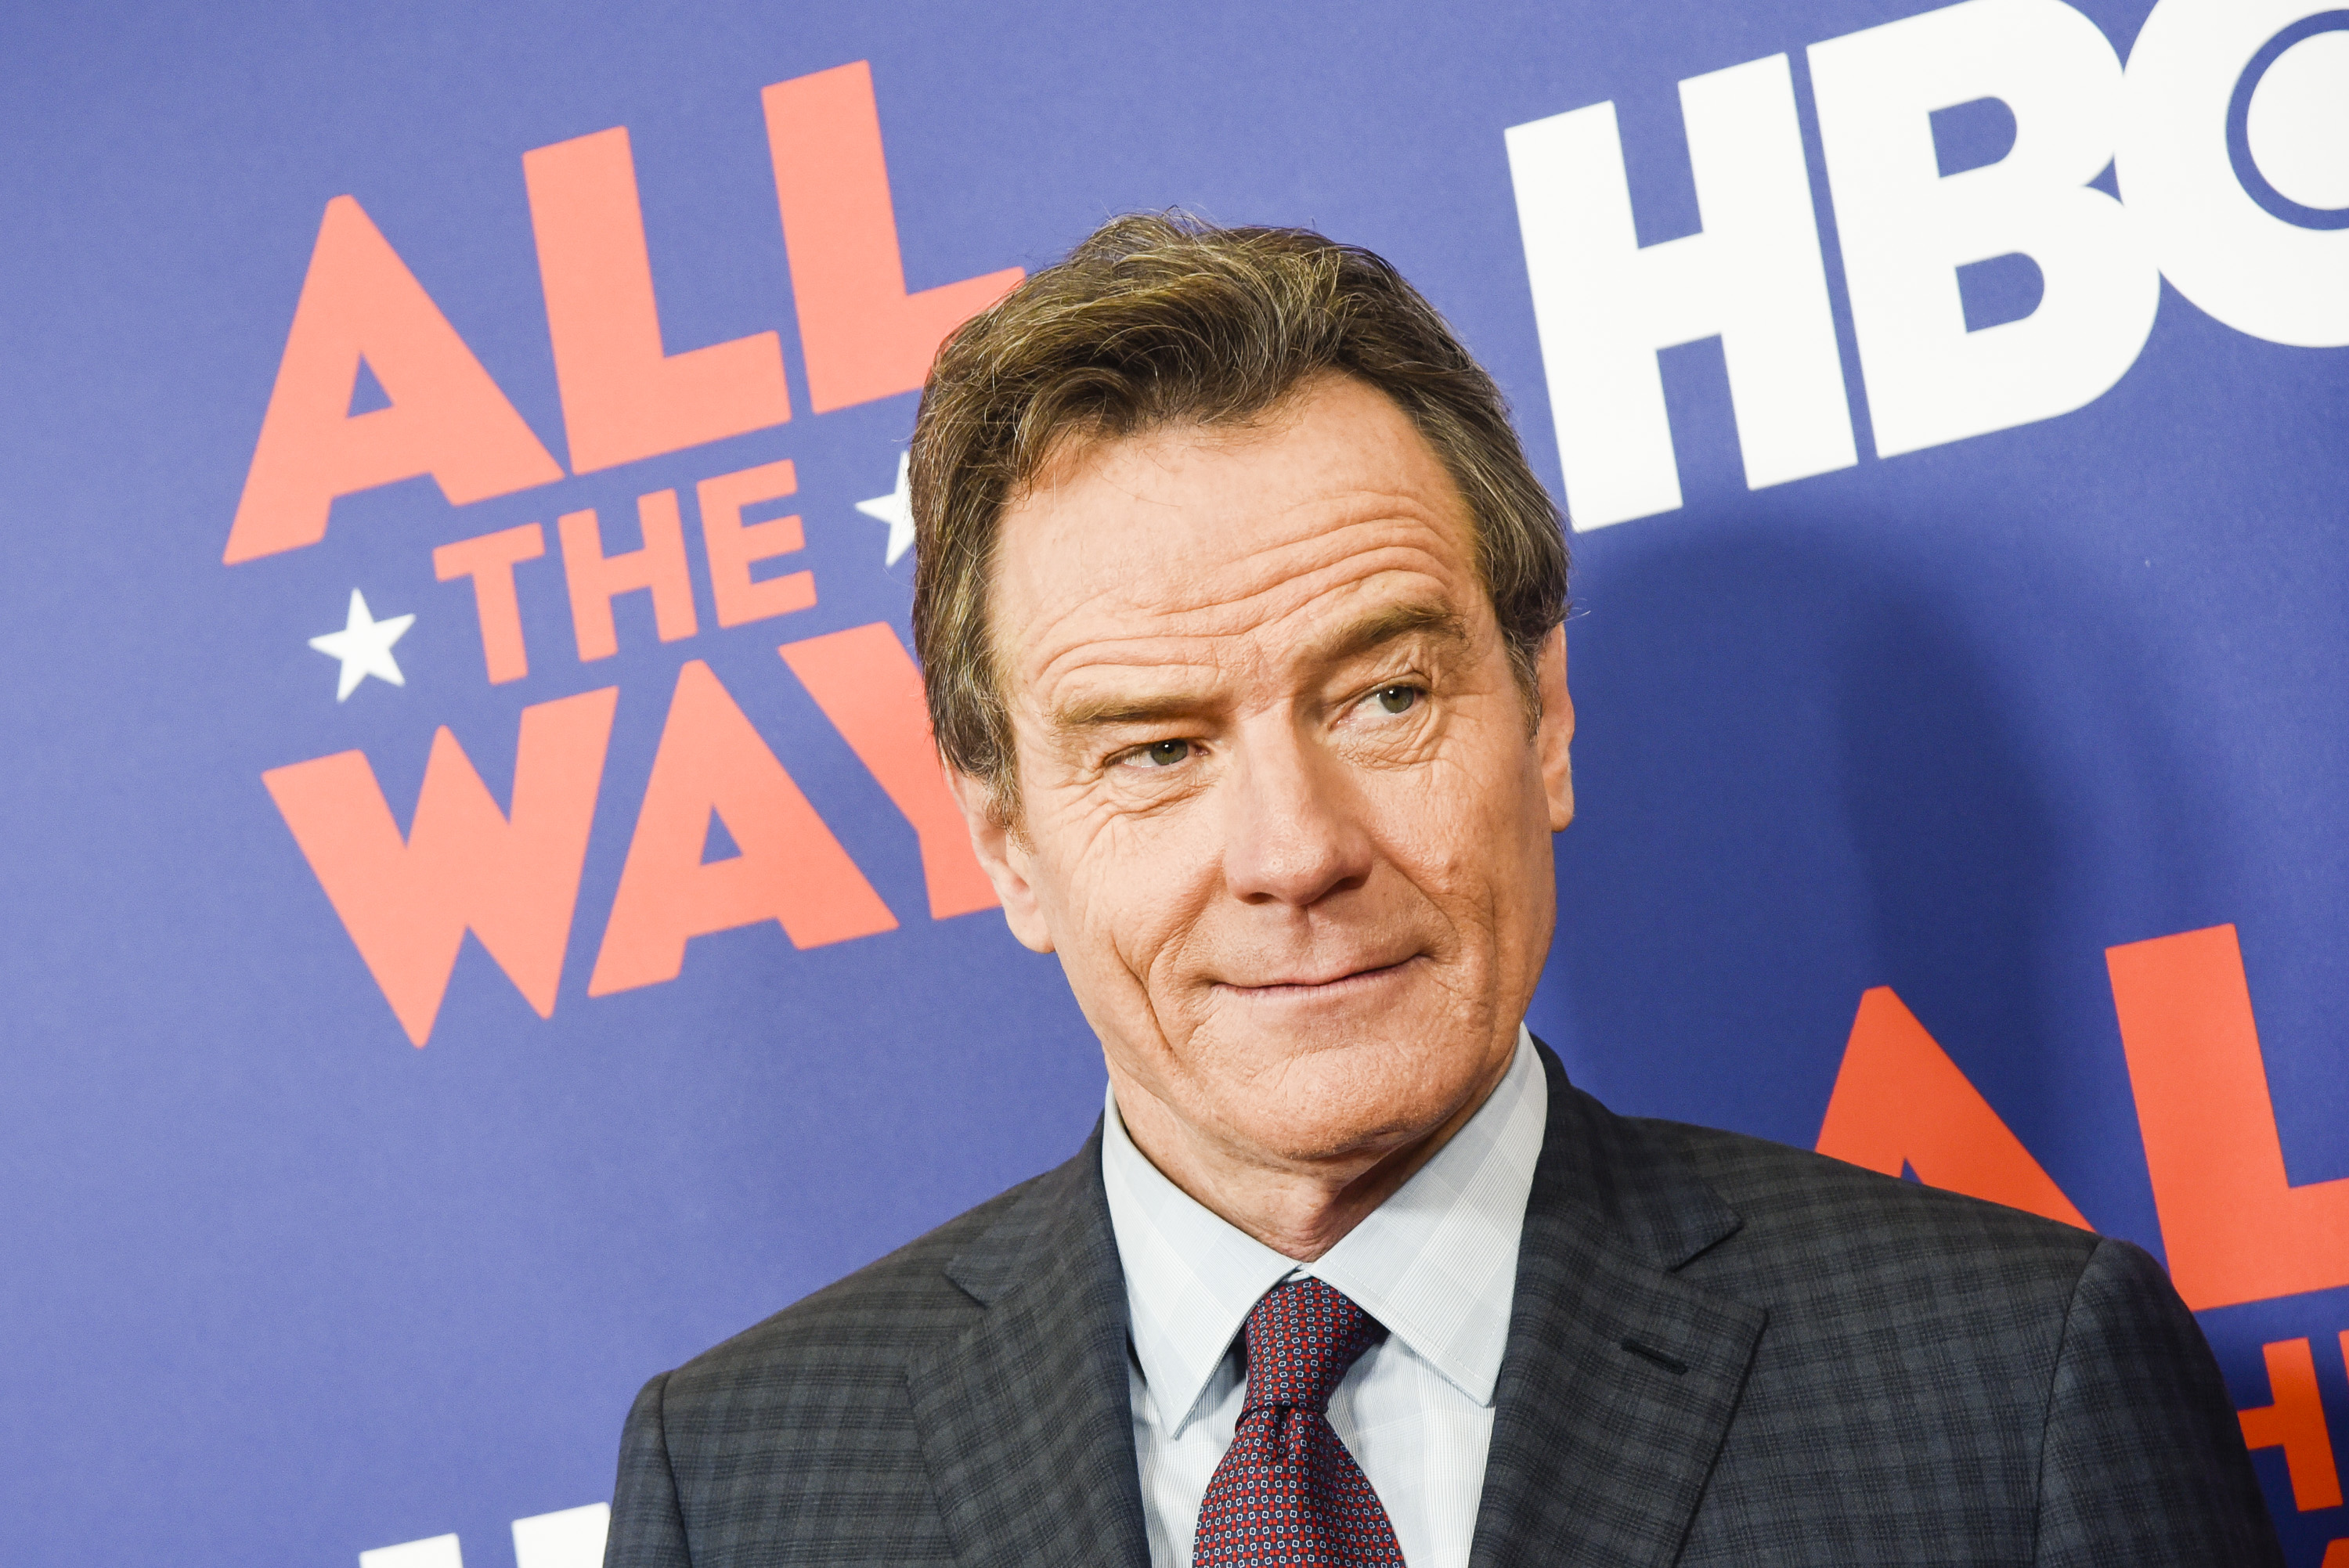 Actor Bryan Cranston poses for photographers during HBO's "All The Way" (Kris Connor-Getty Images)